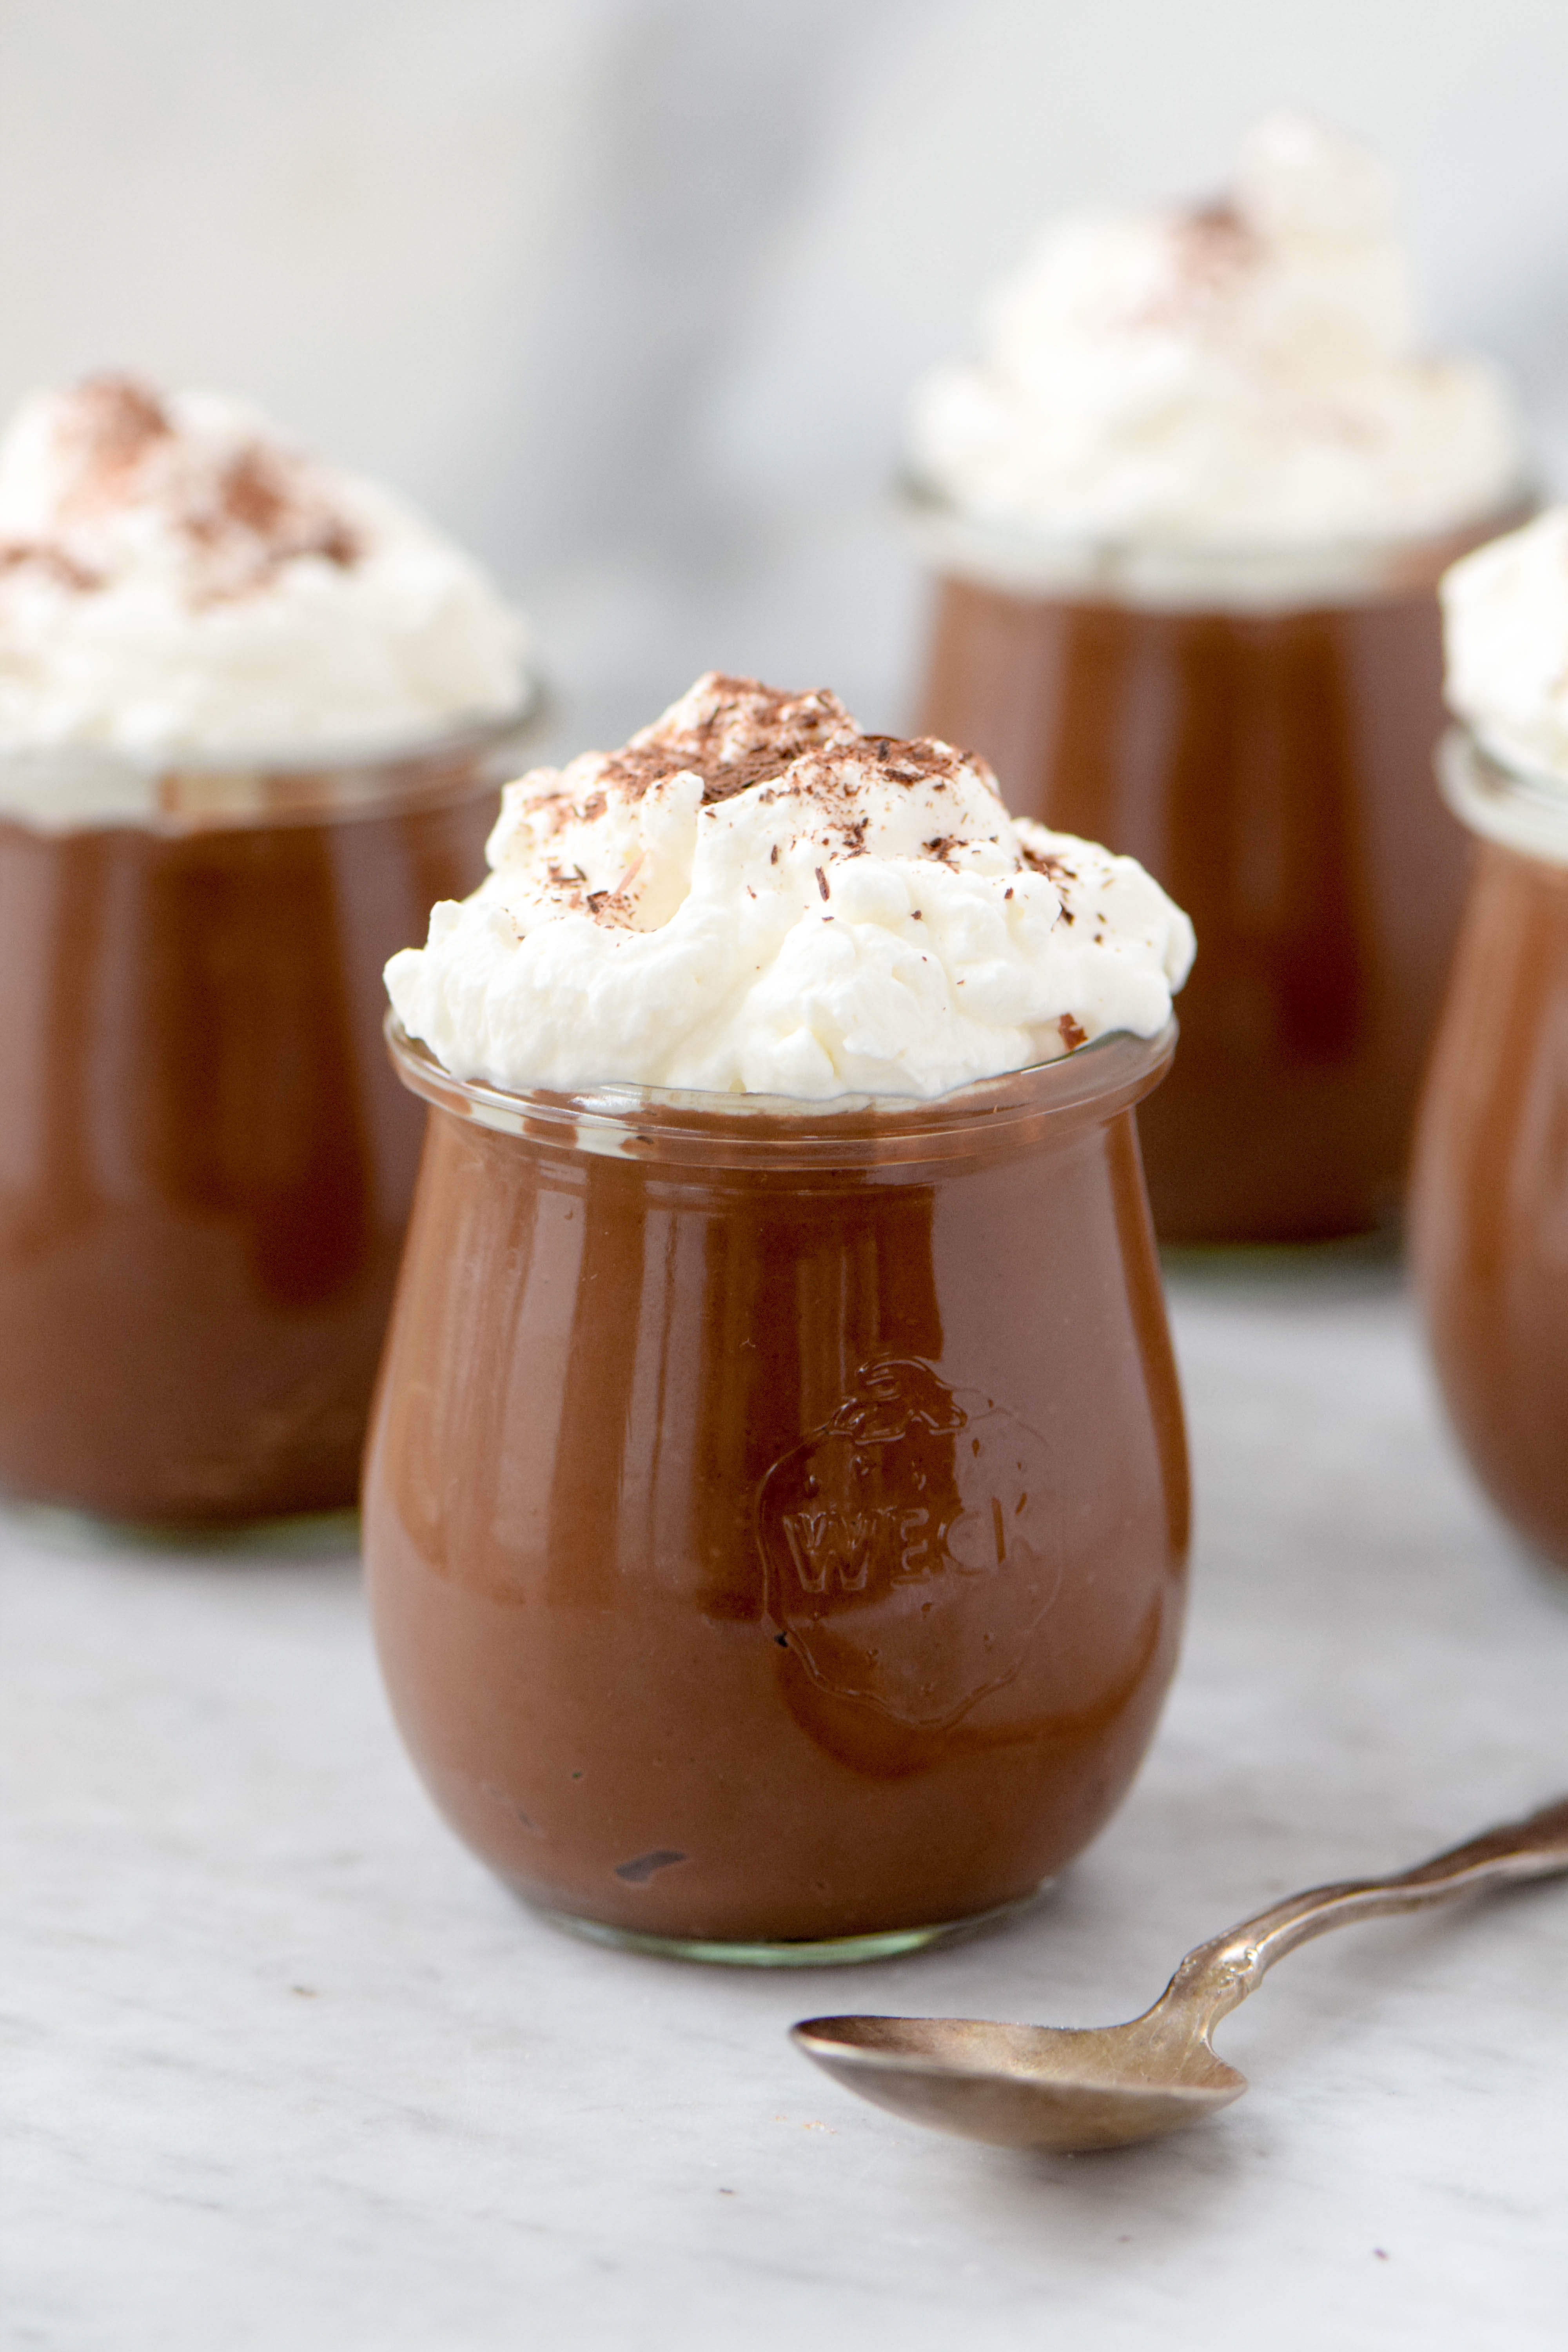 Mexican Chocolate Pudding - West of the Loop